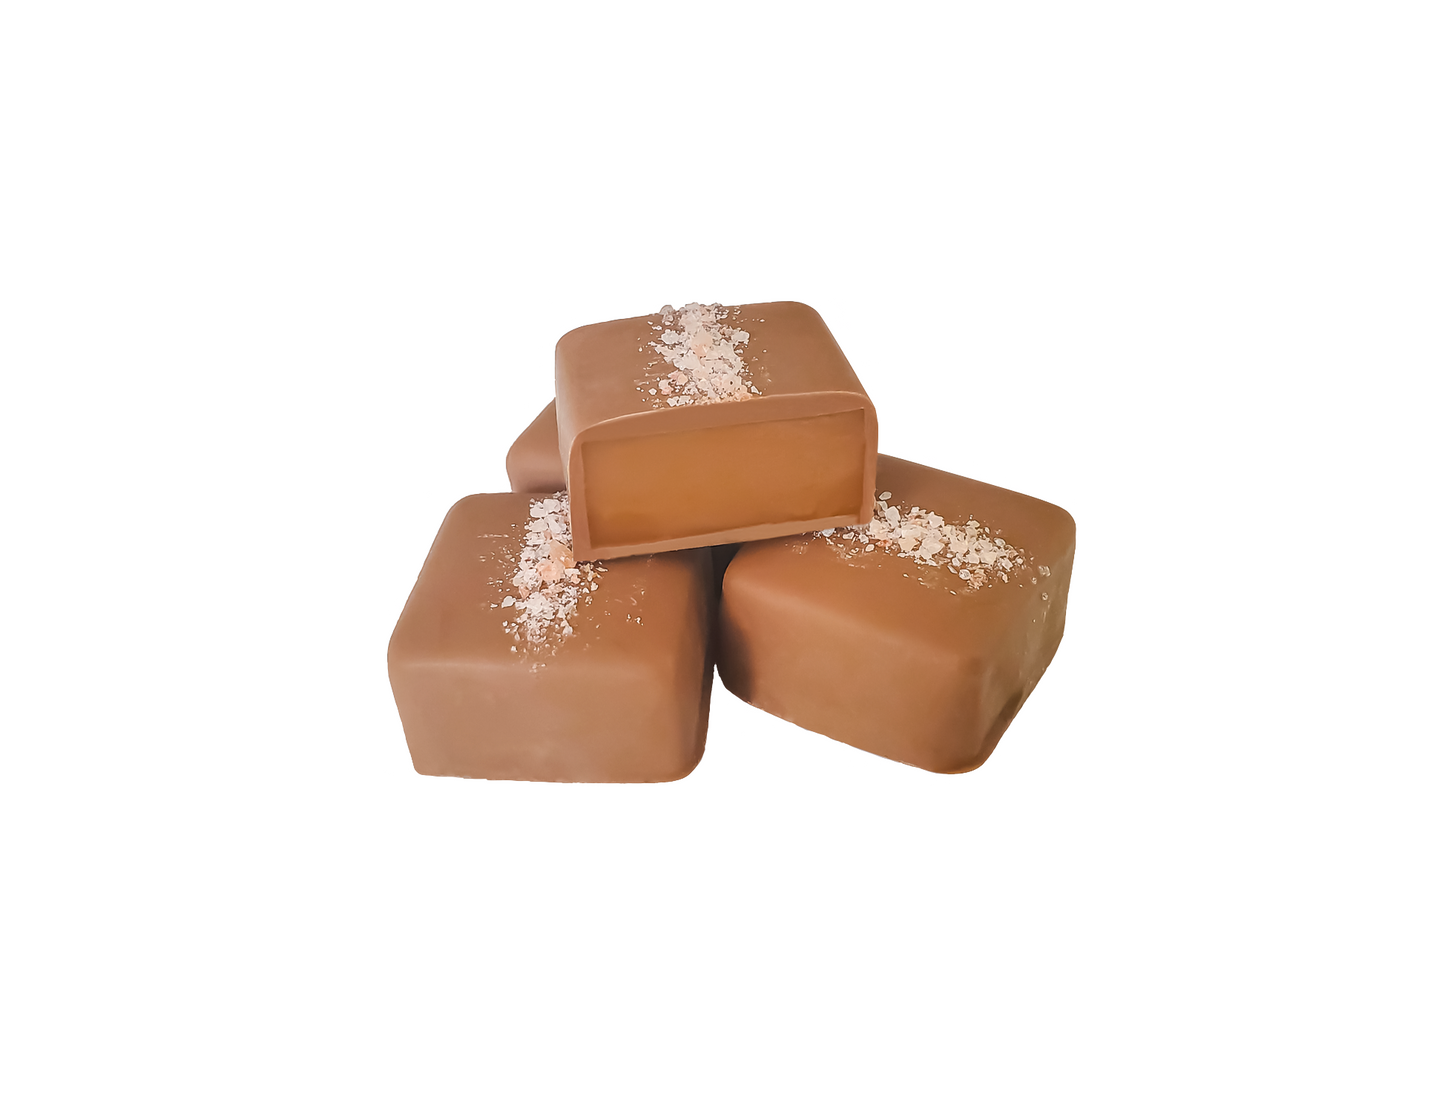 Croce's Salted Caramels, Soft Caramel, Chewy Caramel, Sweet and salty, creamy caramel, Caramel gift, Salted Caramels, Gourmet Caramels